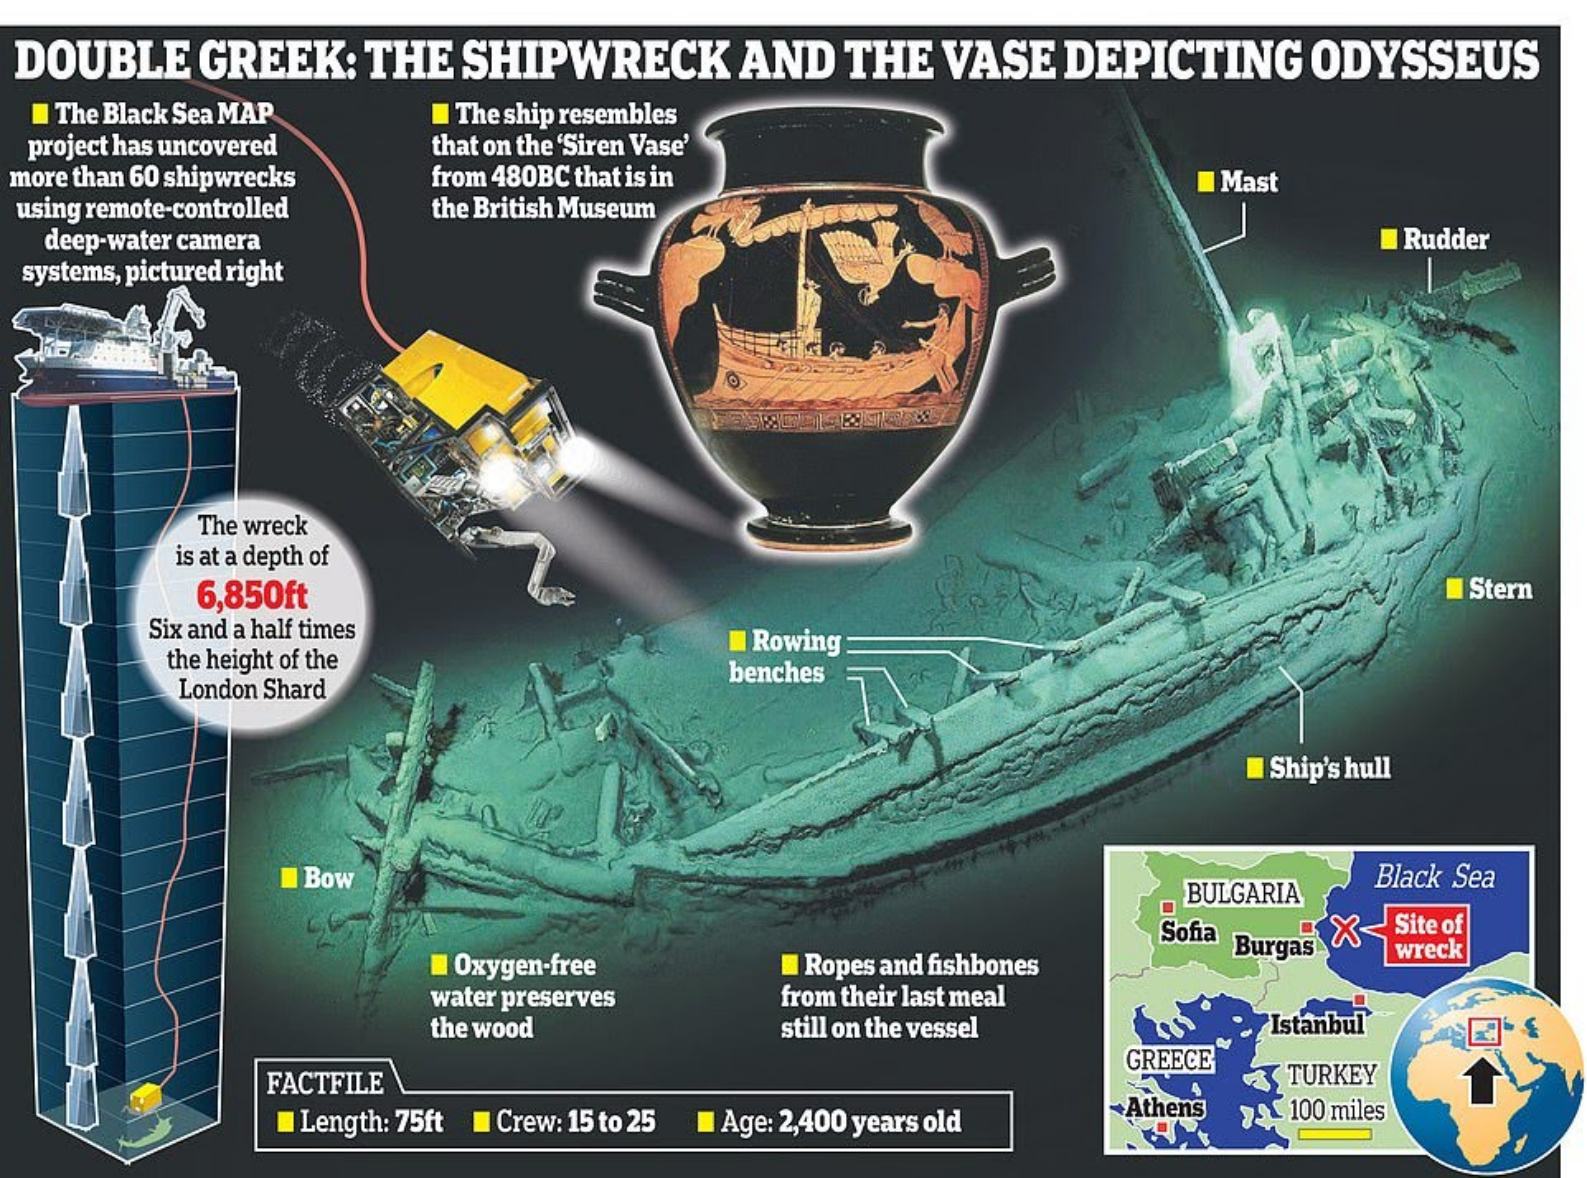 The discovery was made by a team of researchers from the Black Sea Maritime Archaeology Project (MAP), who have been conducting surveys in the area for the past three years. The team used advanced underwater robotic technology to explore the seabed and discovered the shipwreck over 1.3 miles below the surface.